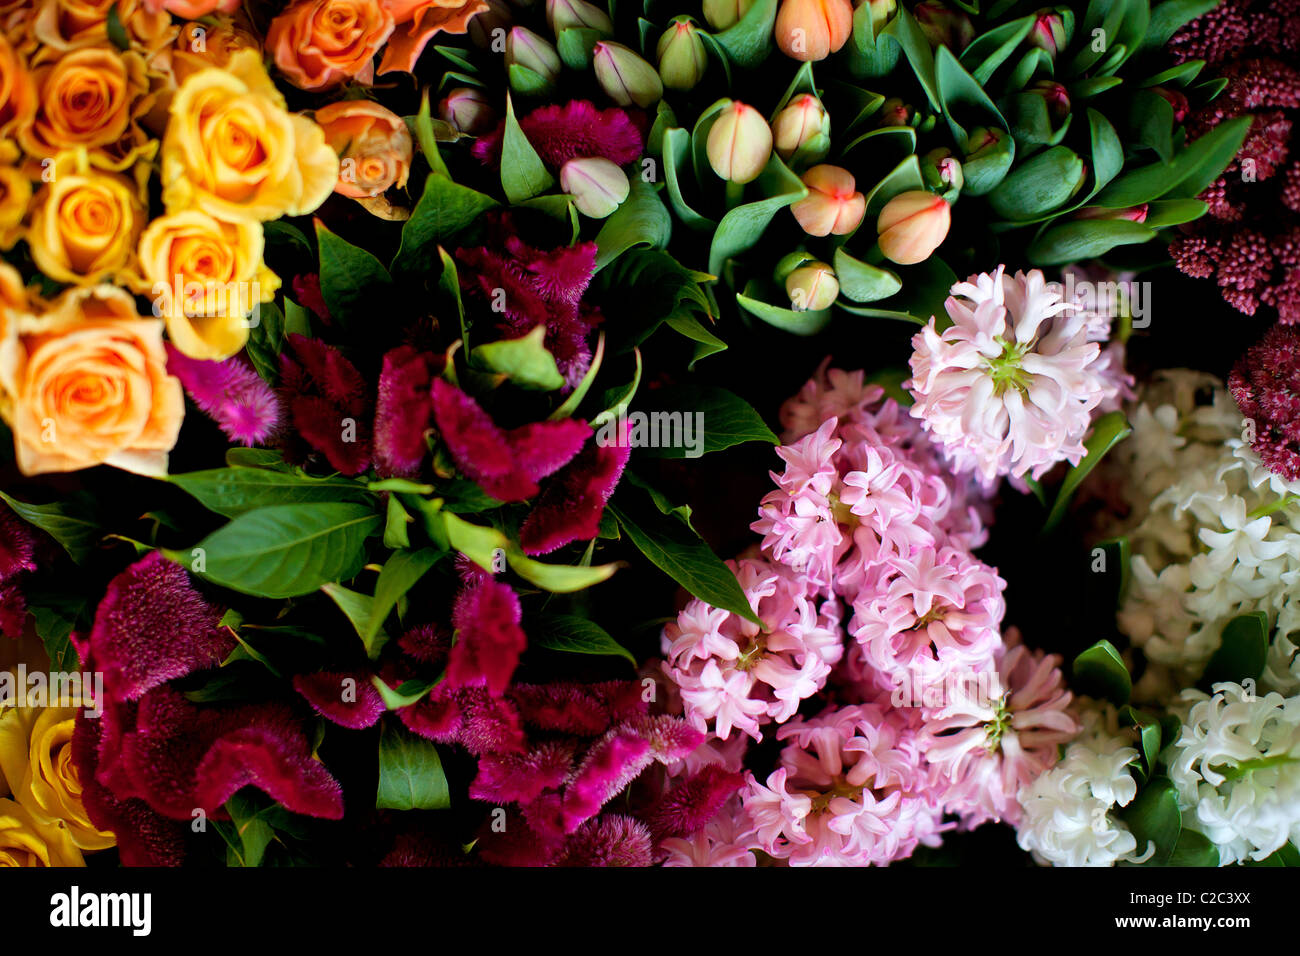 Mixed flowers in florist shop Stock Photo